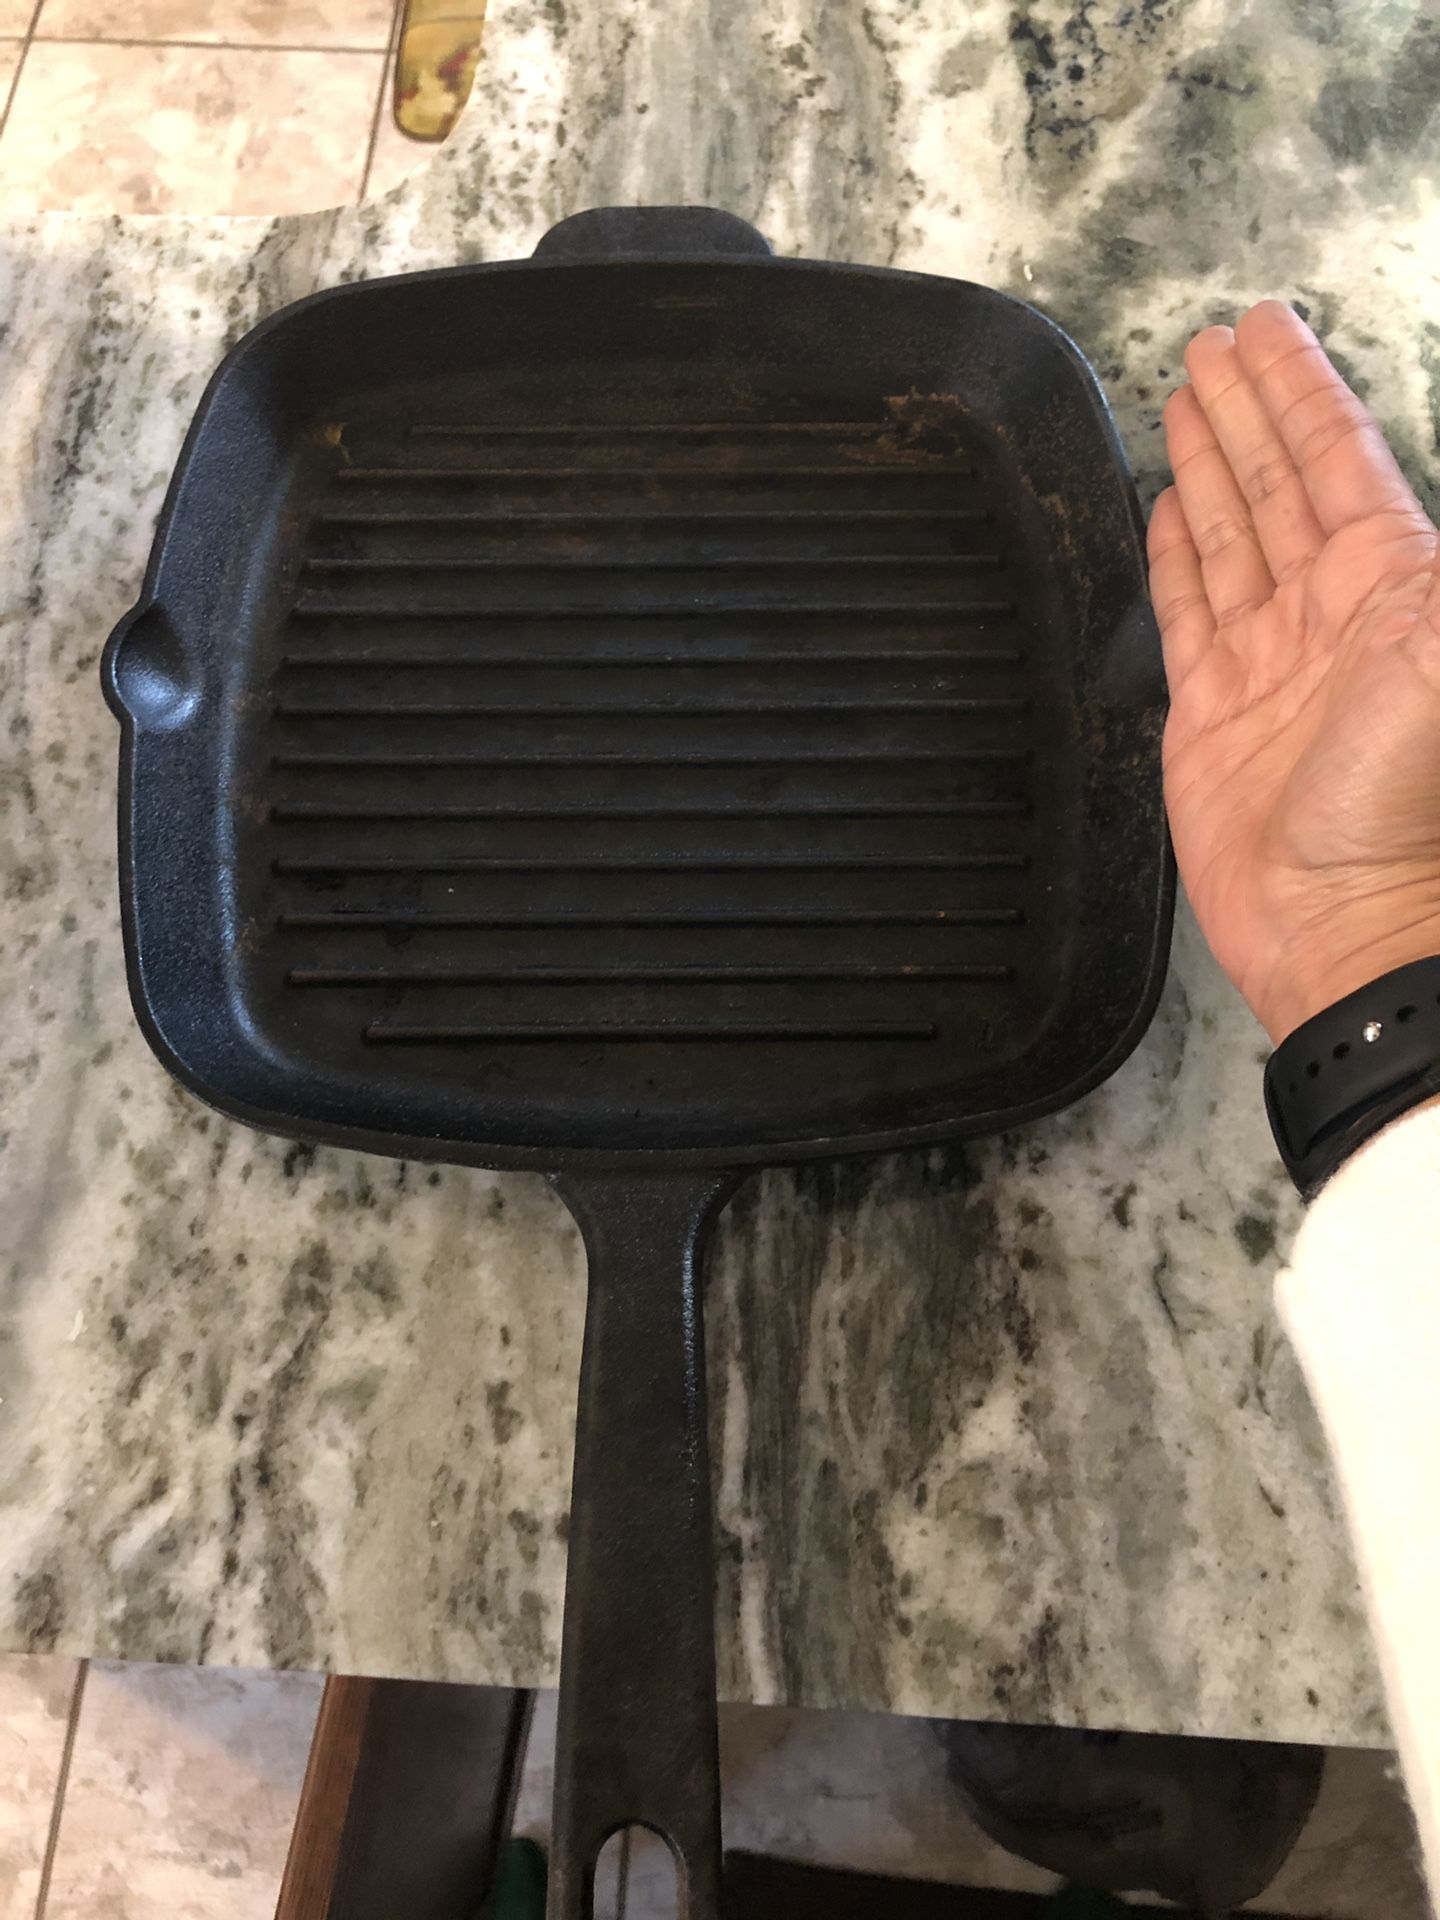 Cast iron grilling pan